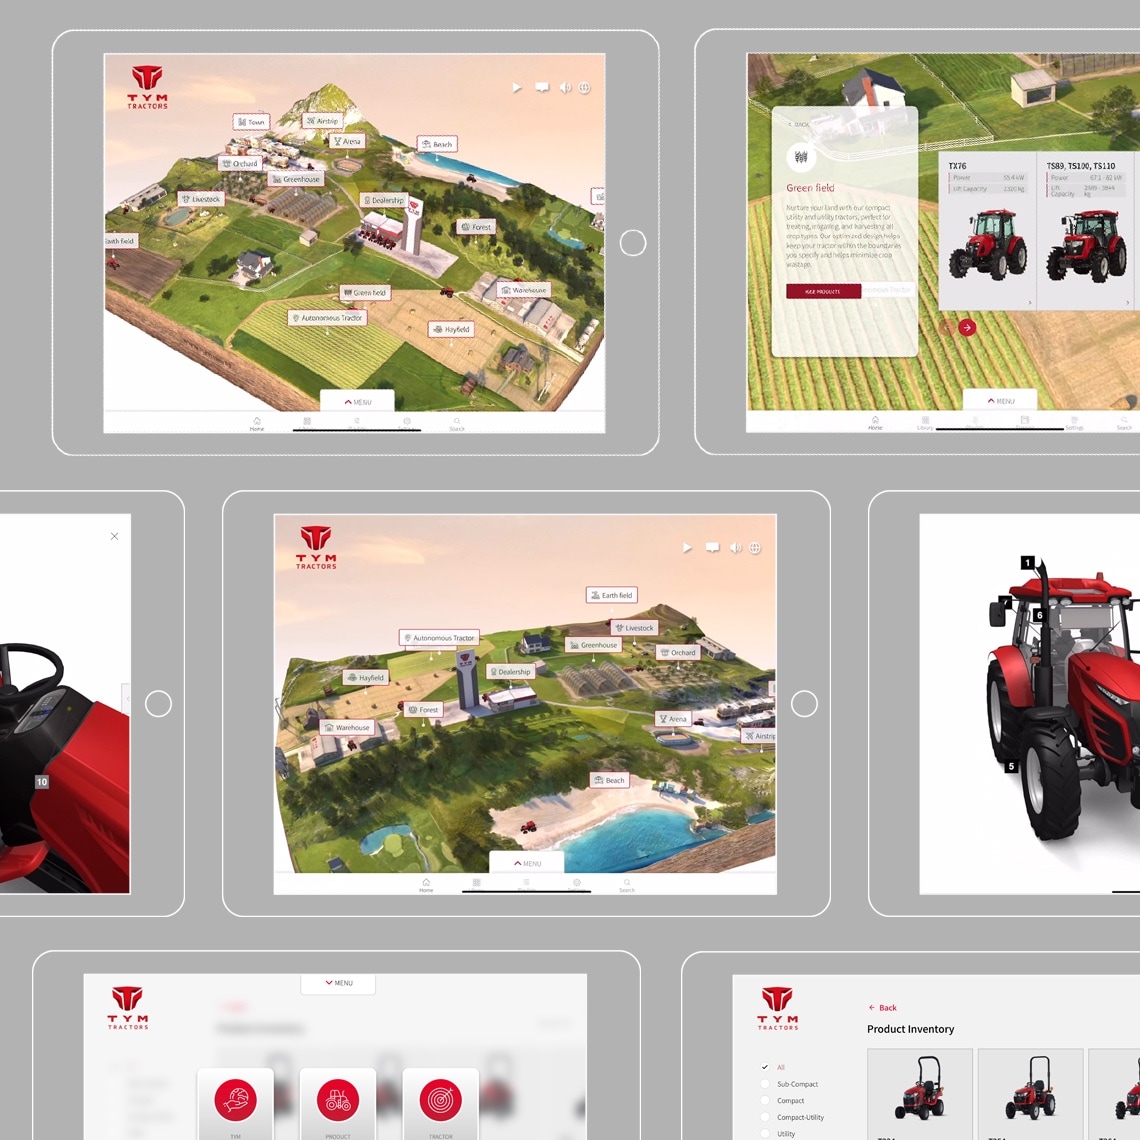 Example of the completely interactive 3-D virtual world that we created to showcase TYM’s product portfolio and applications.